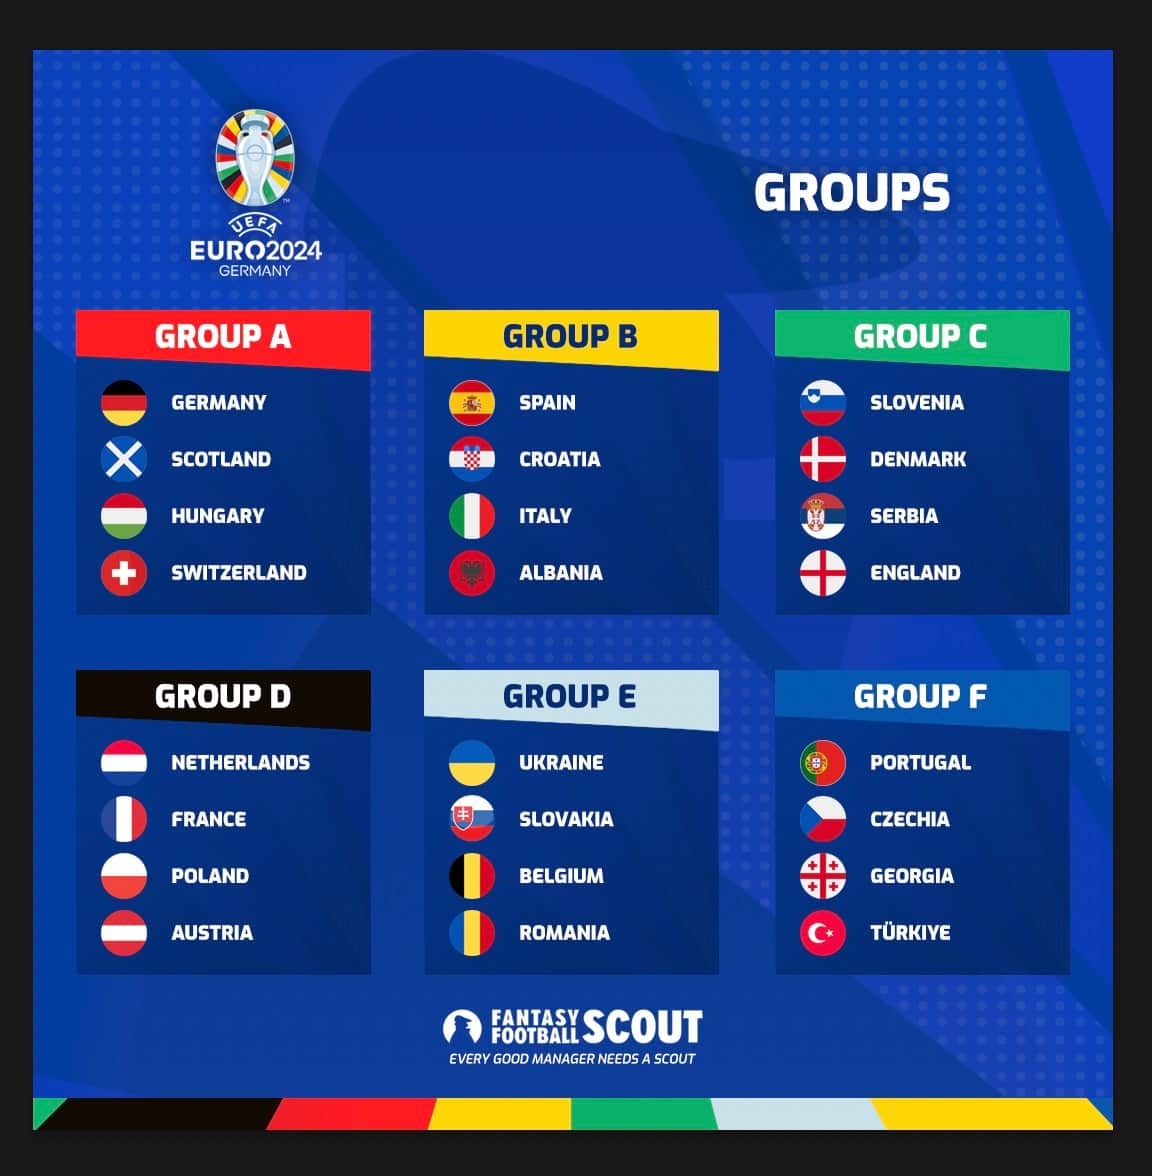 The Euro 2024 Fantasy complete guide: Best players, squads, team reveals + more